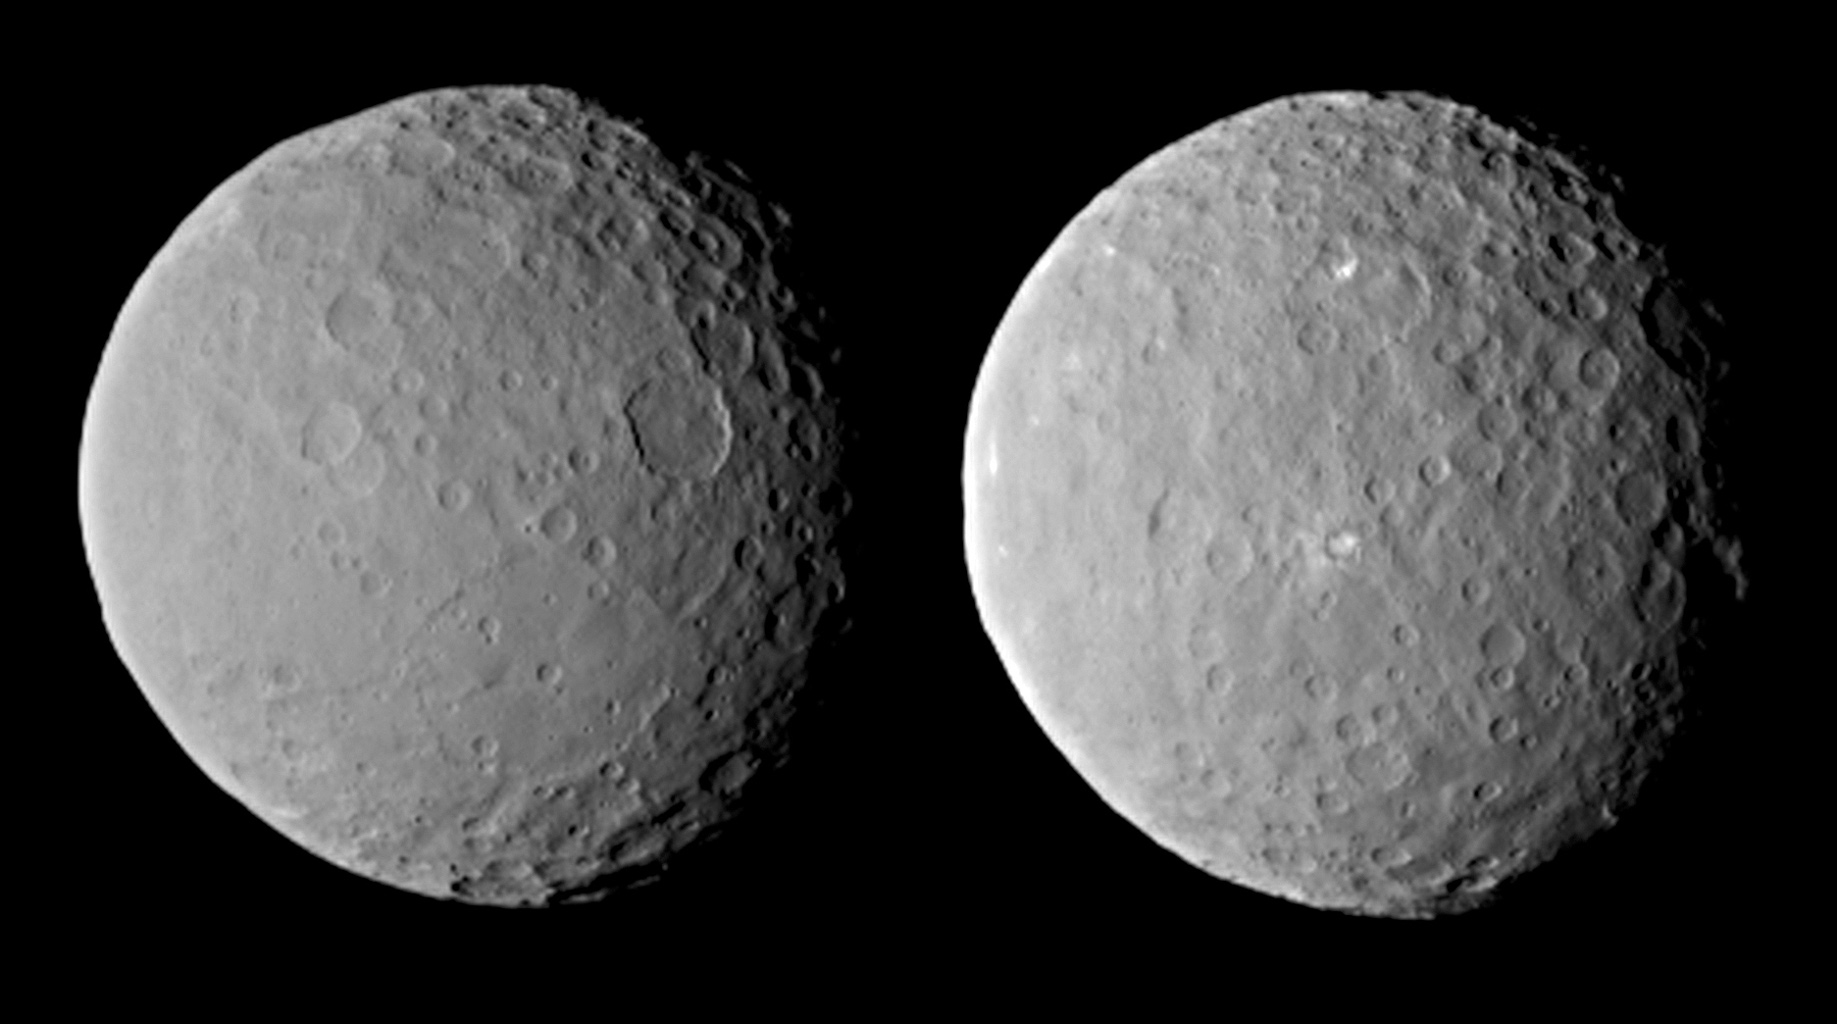 Views of Ceres on Approach